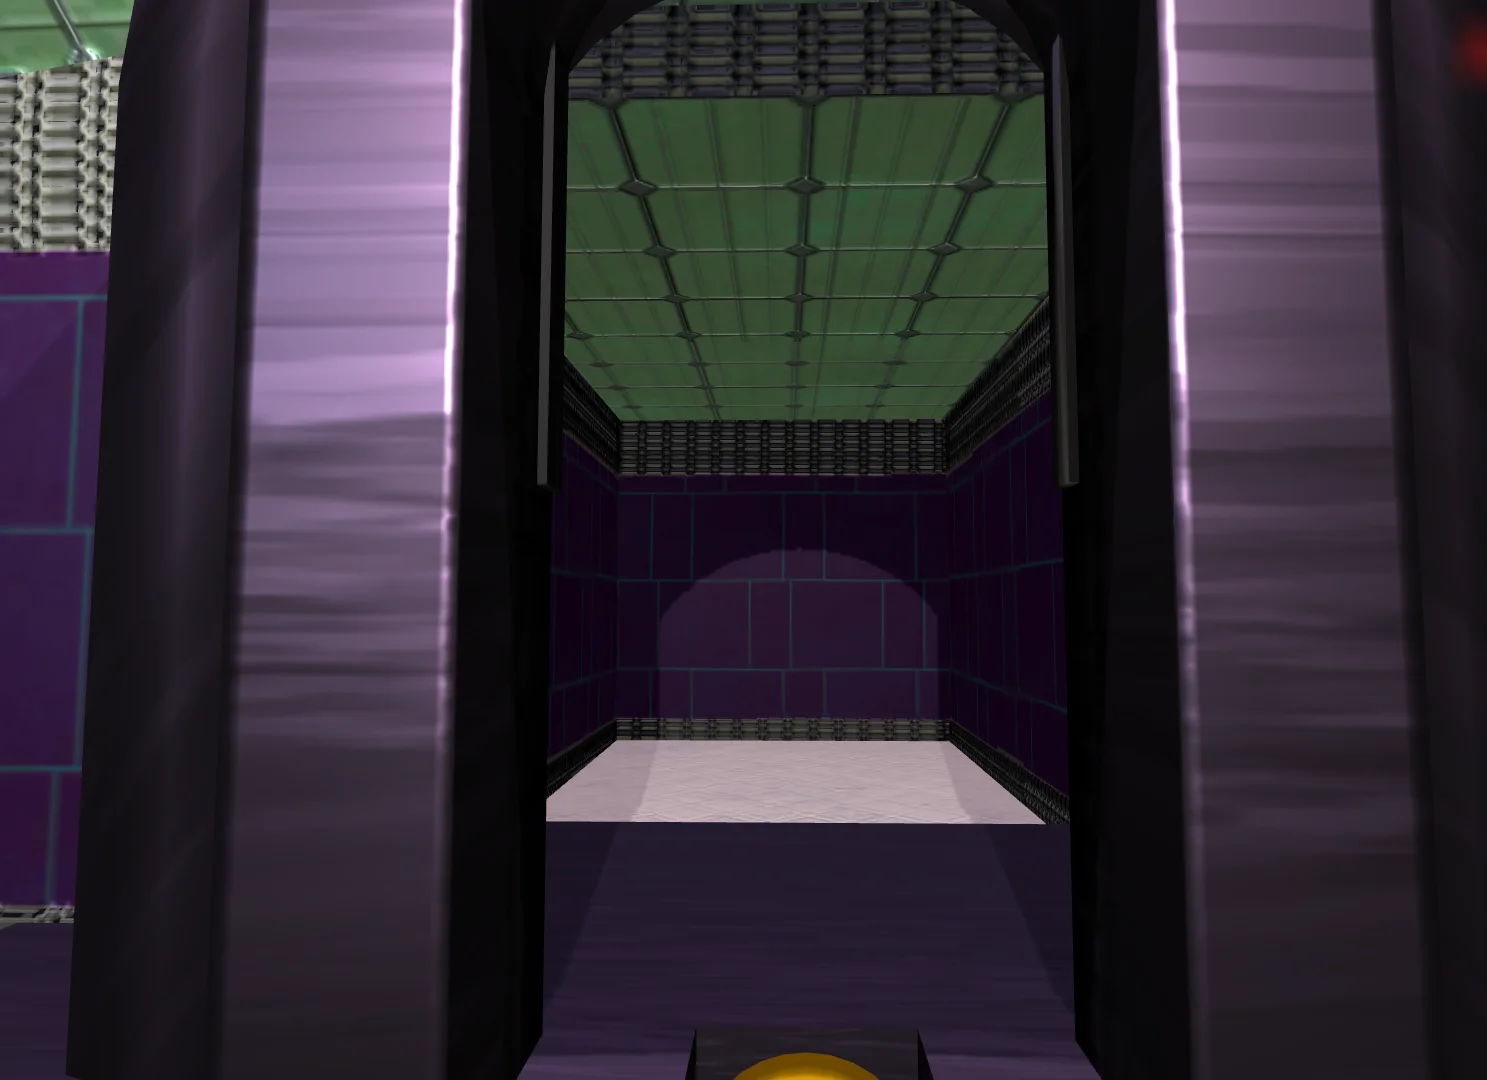 project unity3d, model 3d of door made in blender, laboratory of programming